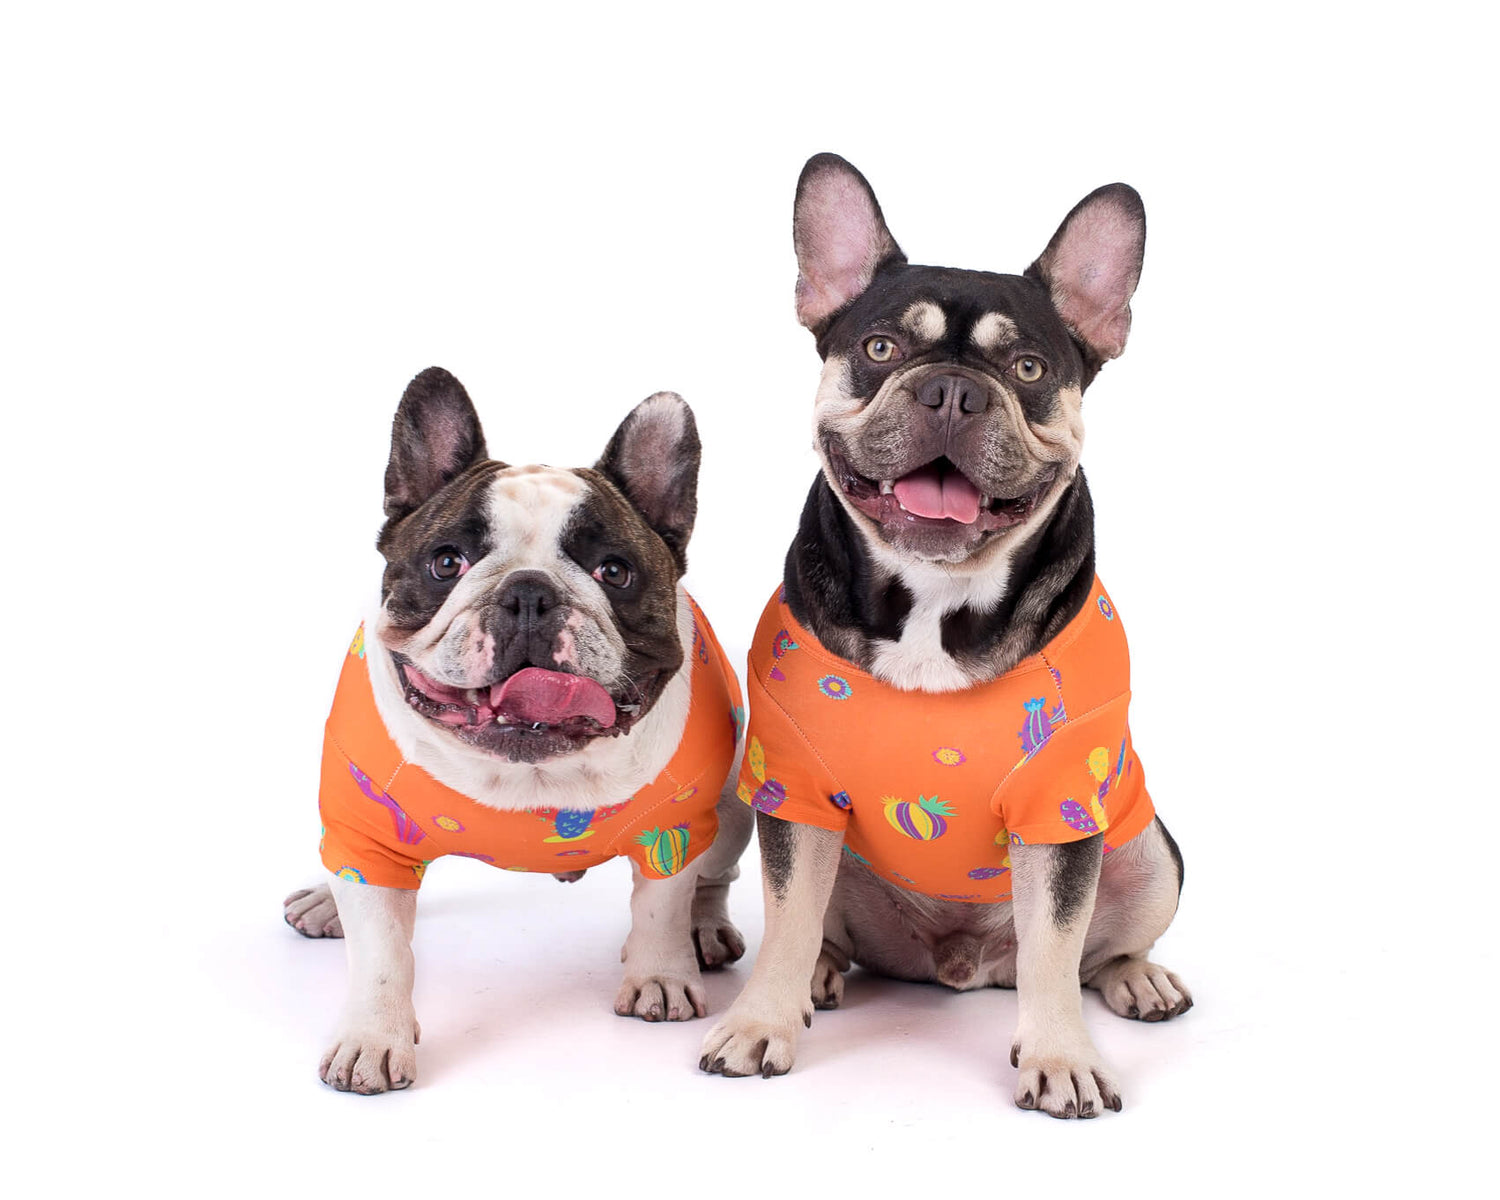 Chester the Brindle pied French Bulldog and Fergus the chocolate and tan French Bulldog. They are standing front on and wearing a Lil Prick shirt for dogs by Vibrant Hound. It is a bright orange shirt with multi-coloured cactus printed on it.